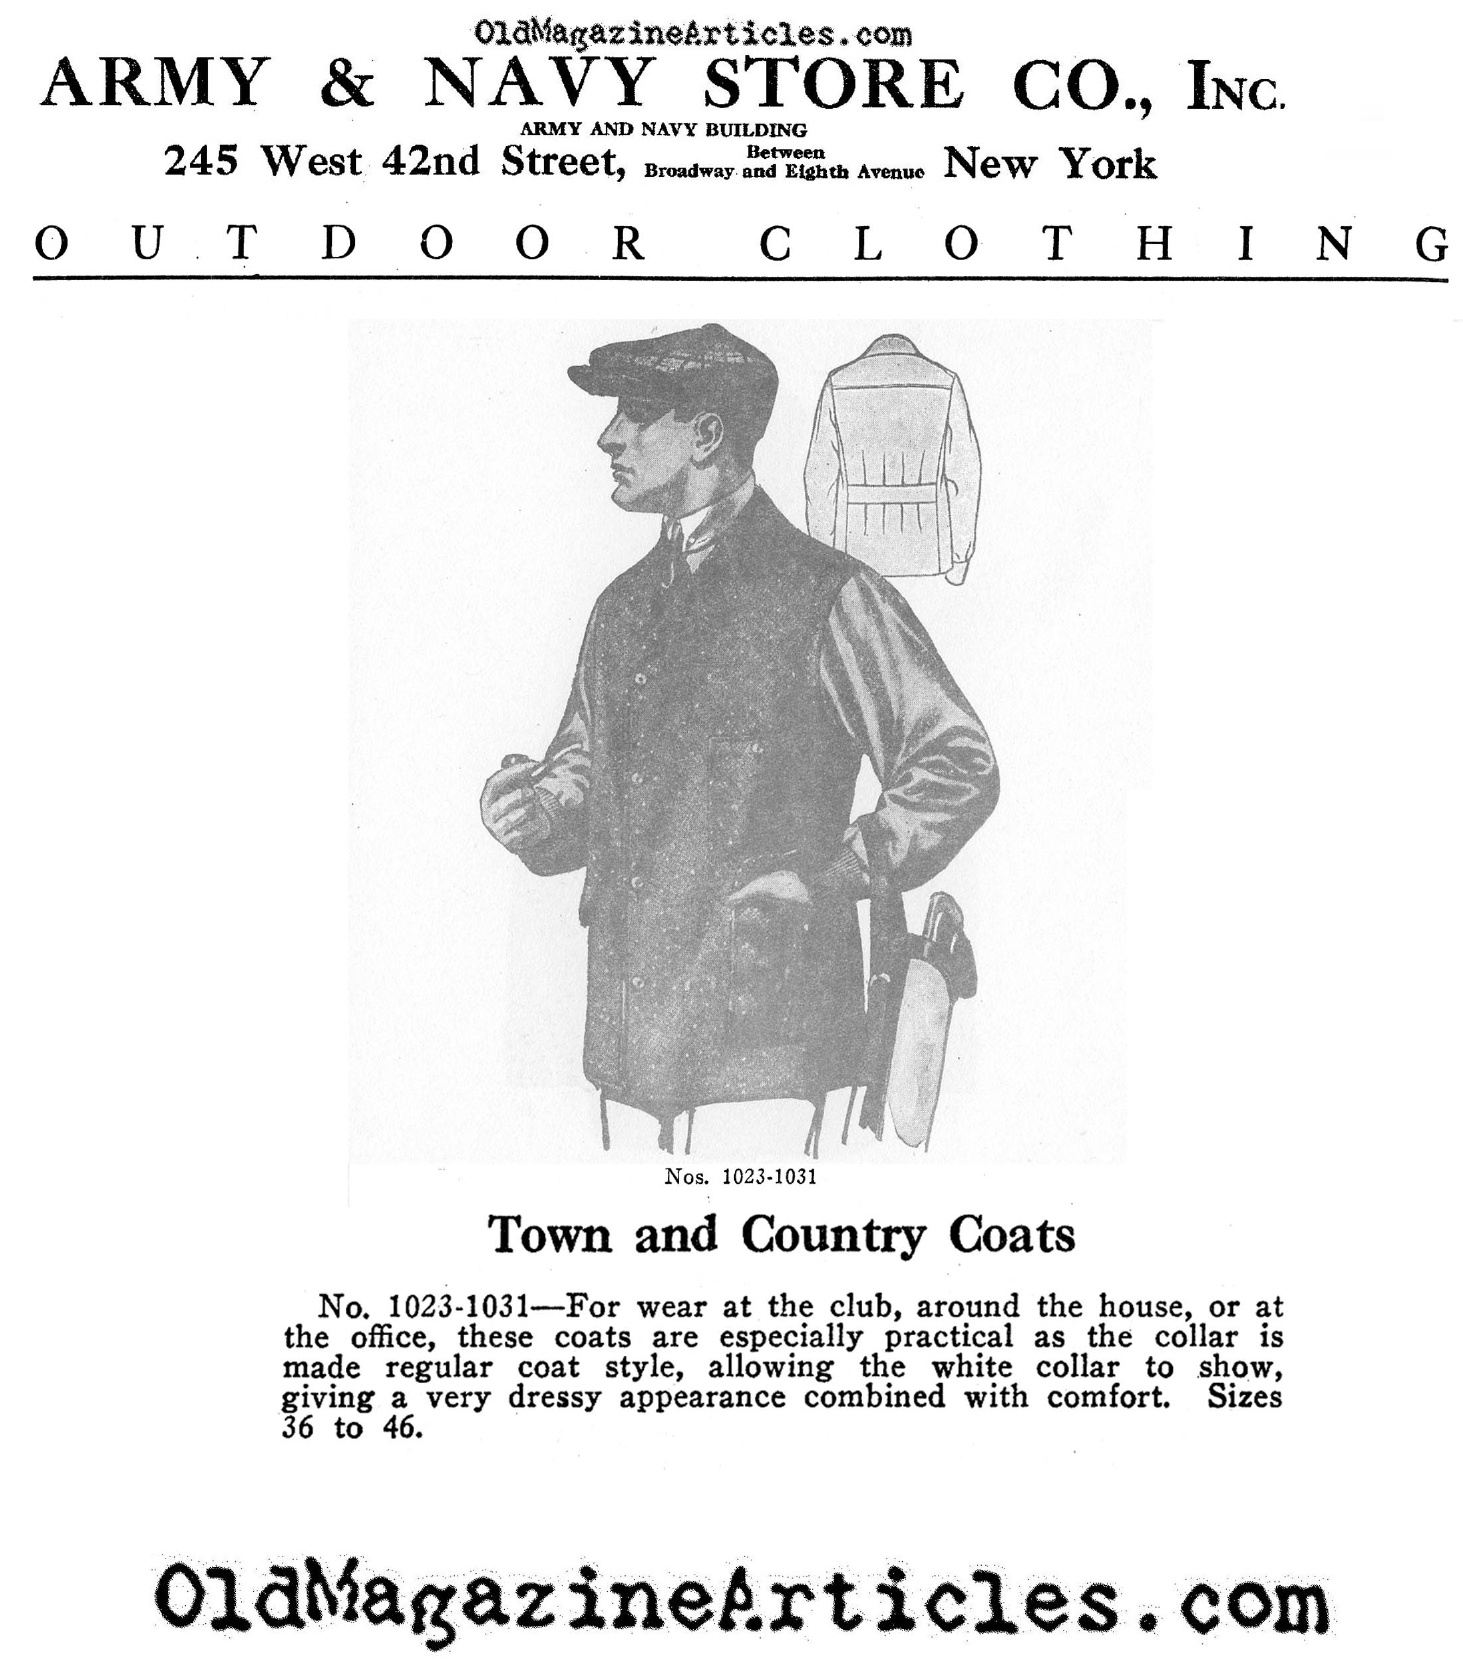 The Working-Class Golfer (A and N Catalog, 1918)